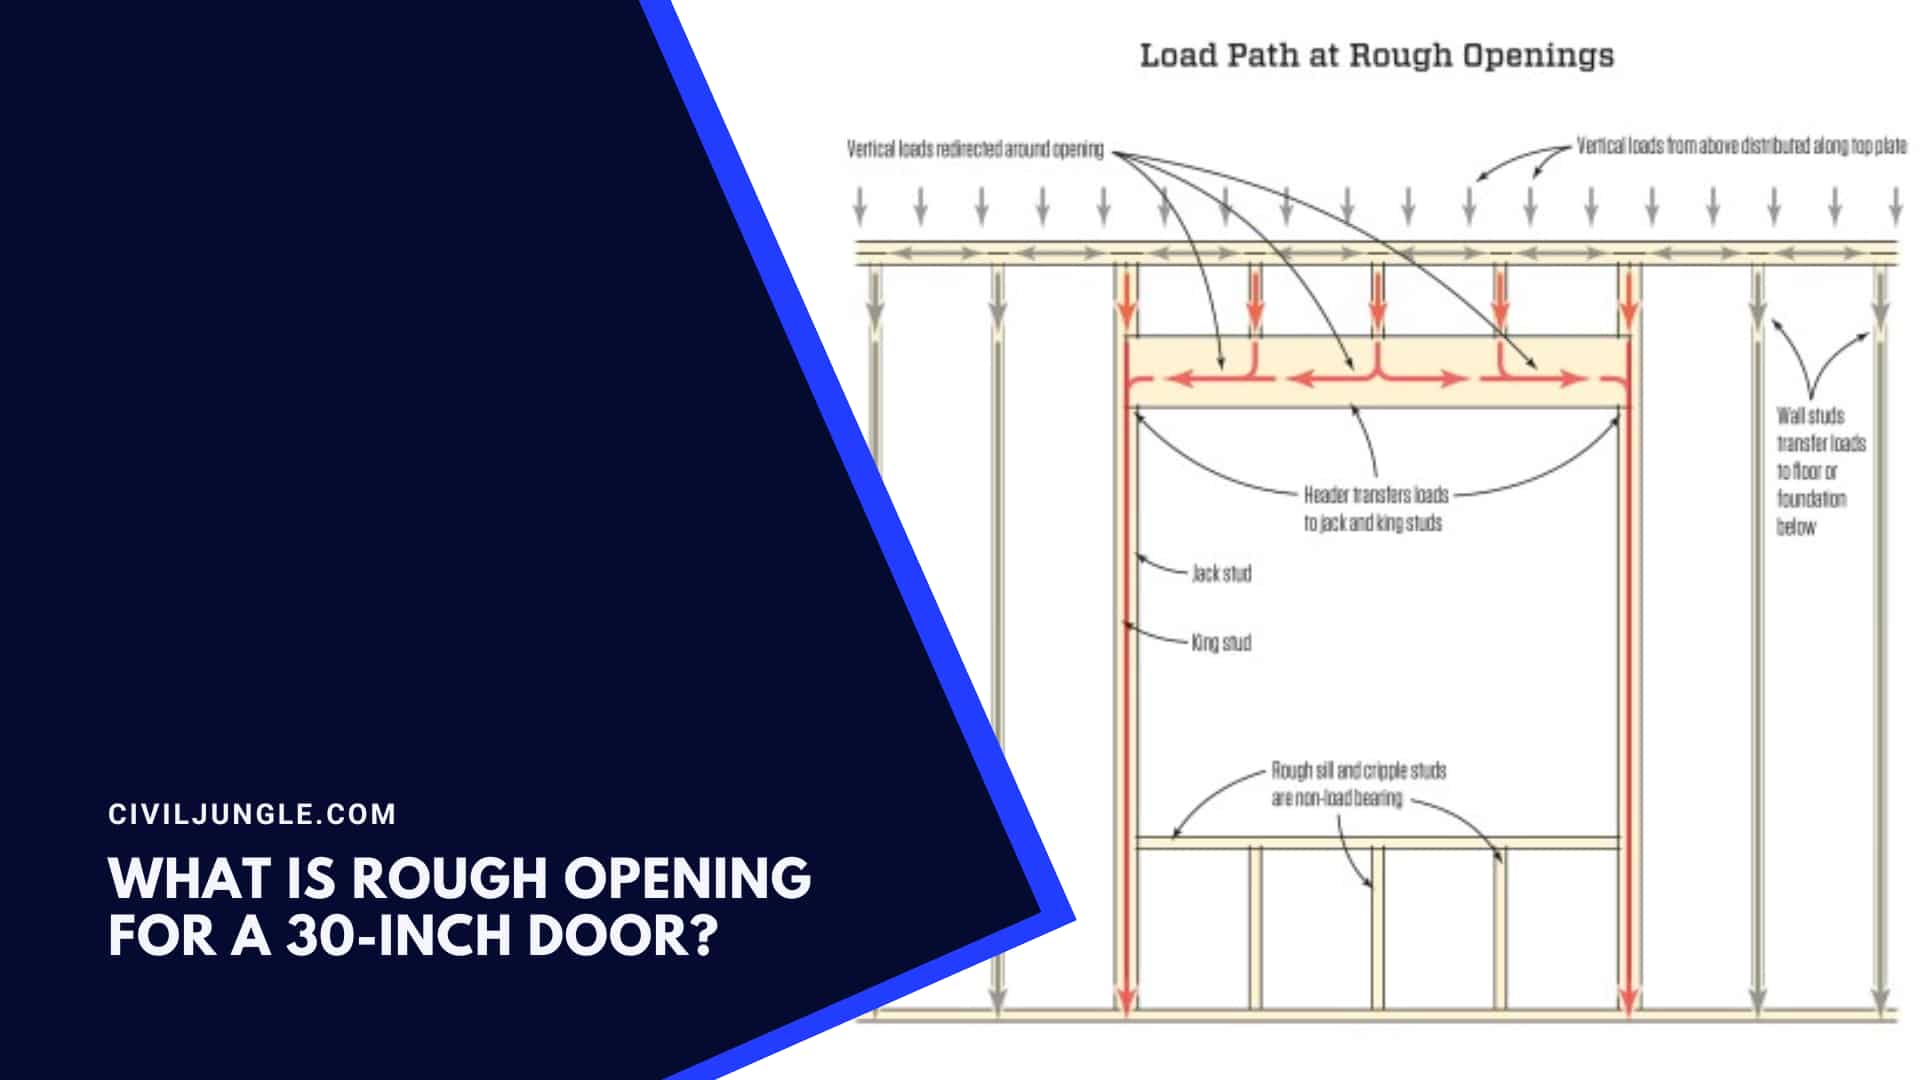 What Is Rough Opening for a 30-Inch Door?